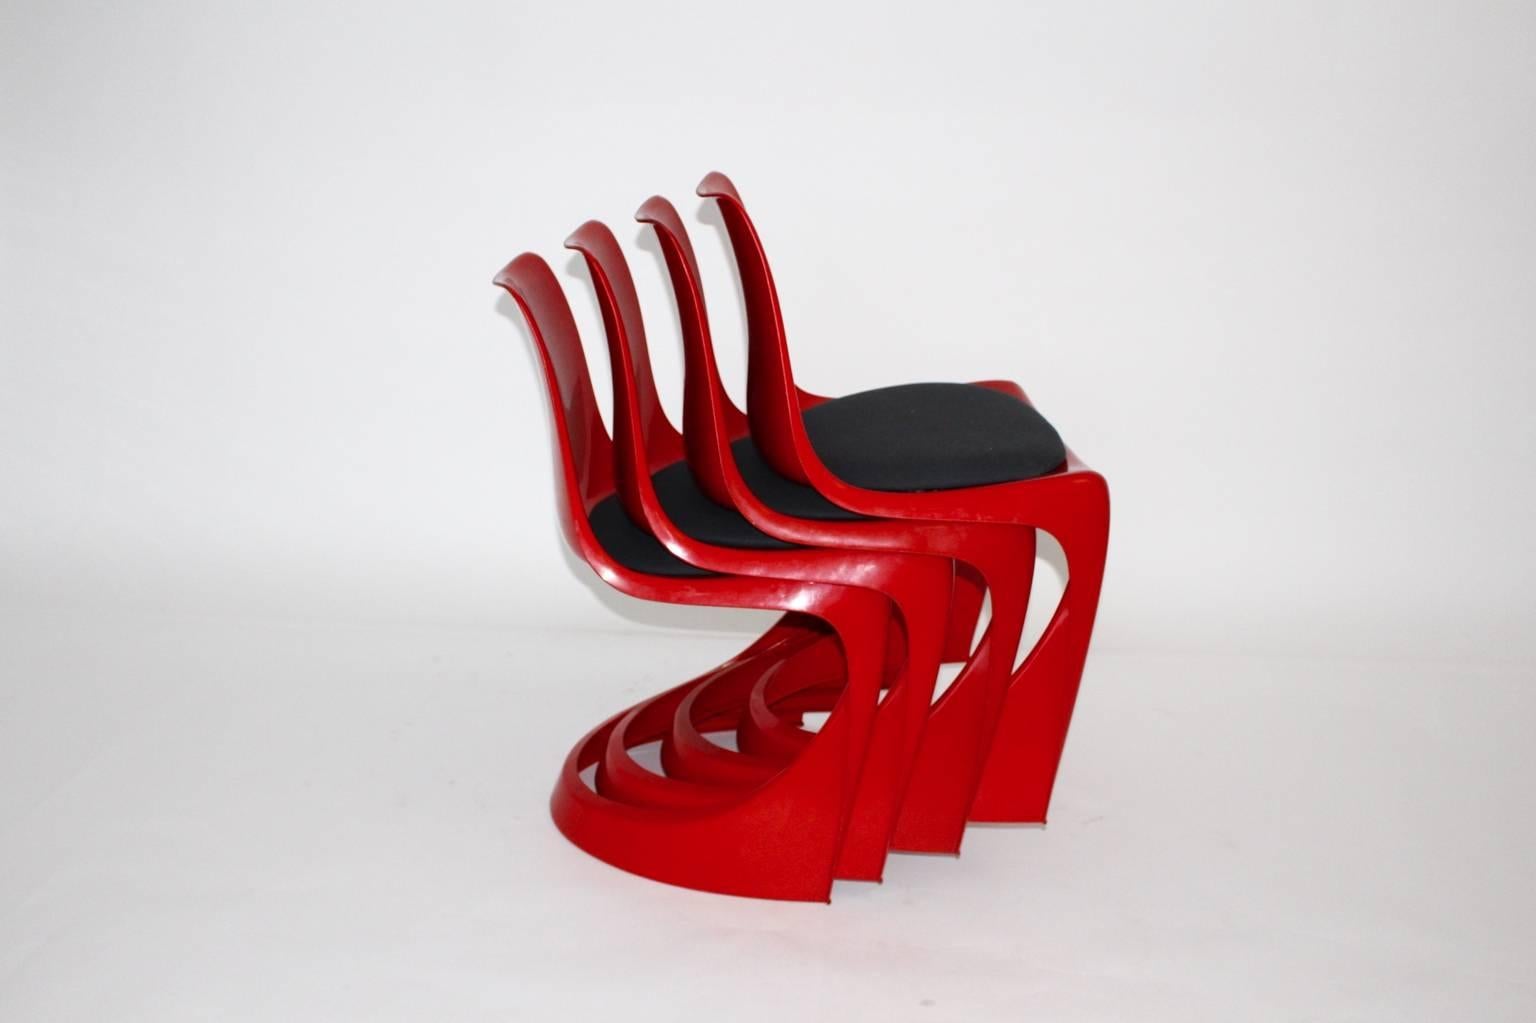 plastic red chairs